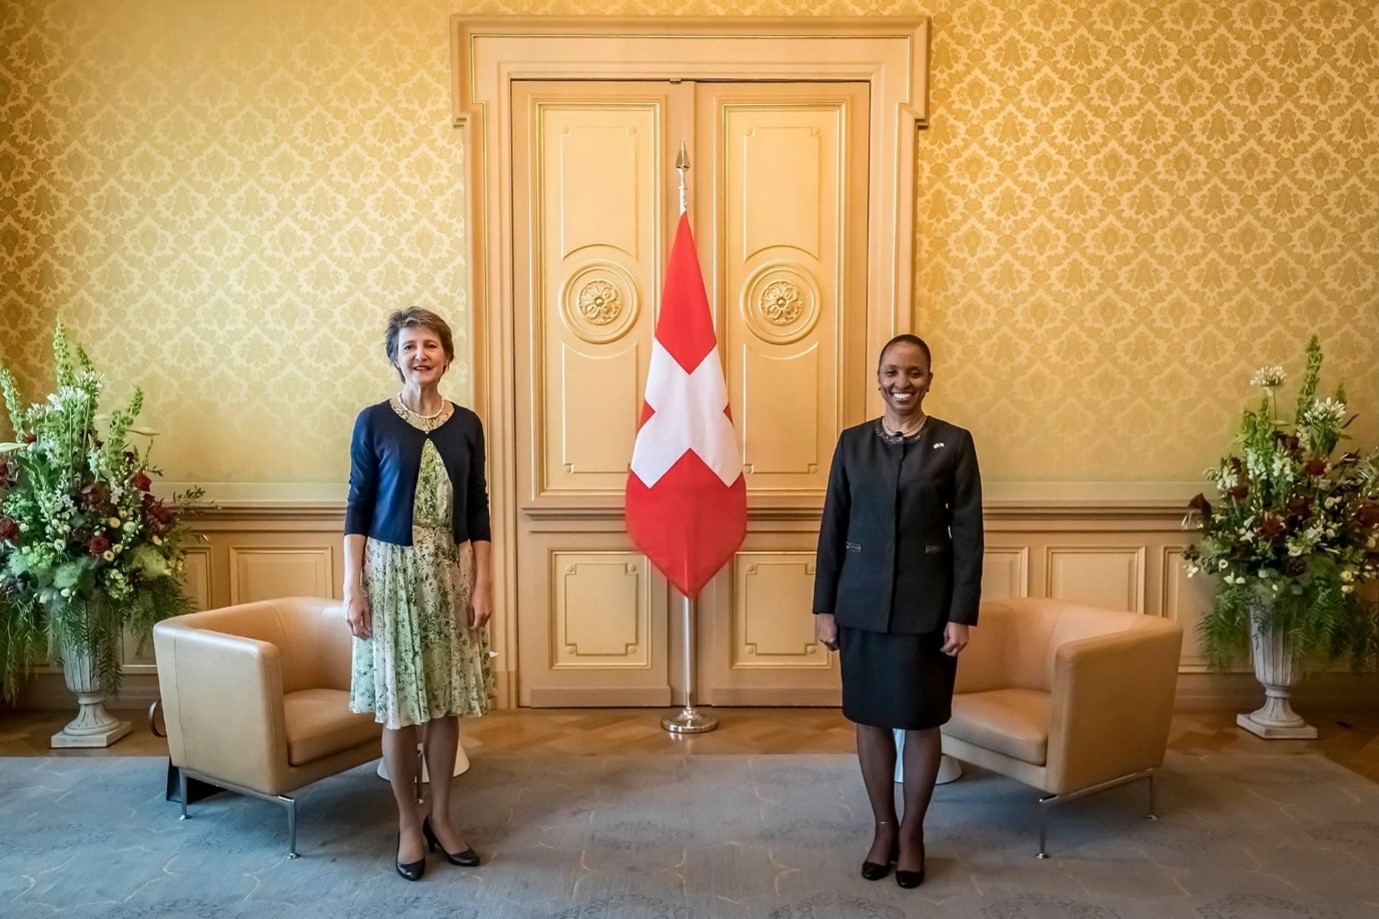 HE Keva L. Bain, Ambassador Extraordinary and Plenipotentiary, presented her Credentials to the President of the Swiss Confederation, H.E. Ms. Simonetta Sommaruga